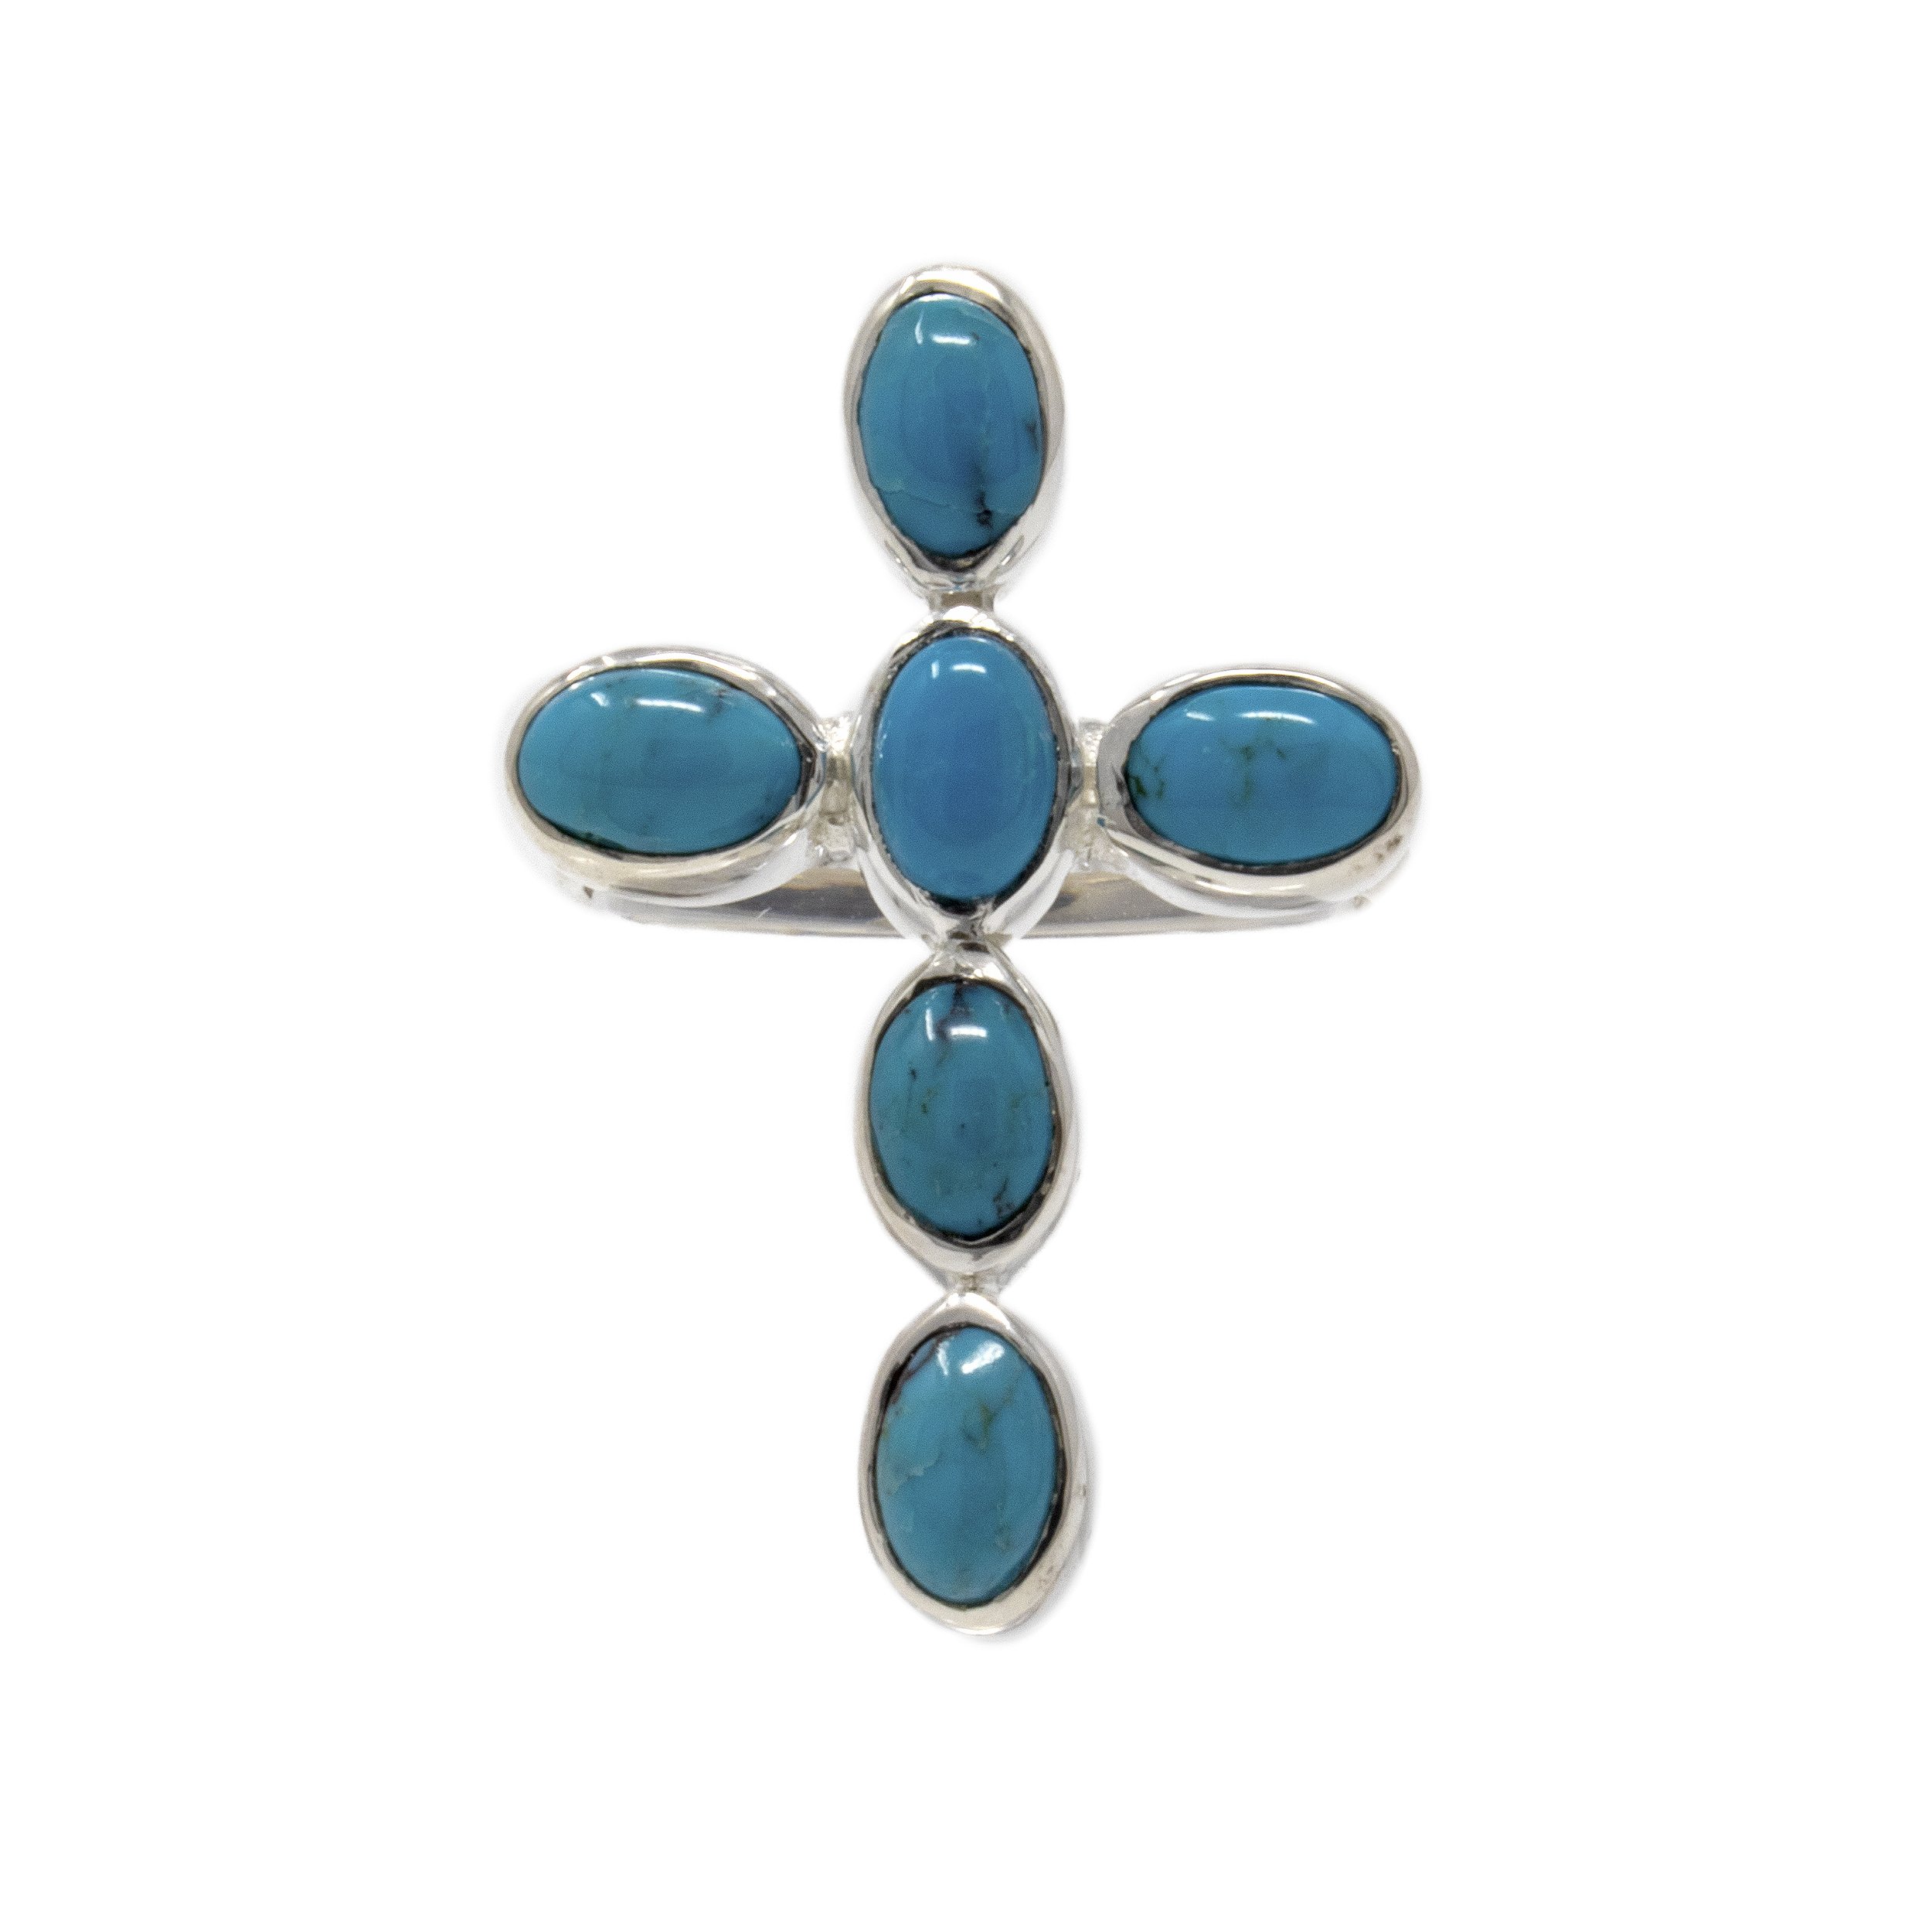 Mexican Turquoise Cross Ring - 6 Oval Cabochons With Simple Silver Bezels Size 8